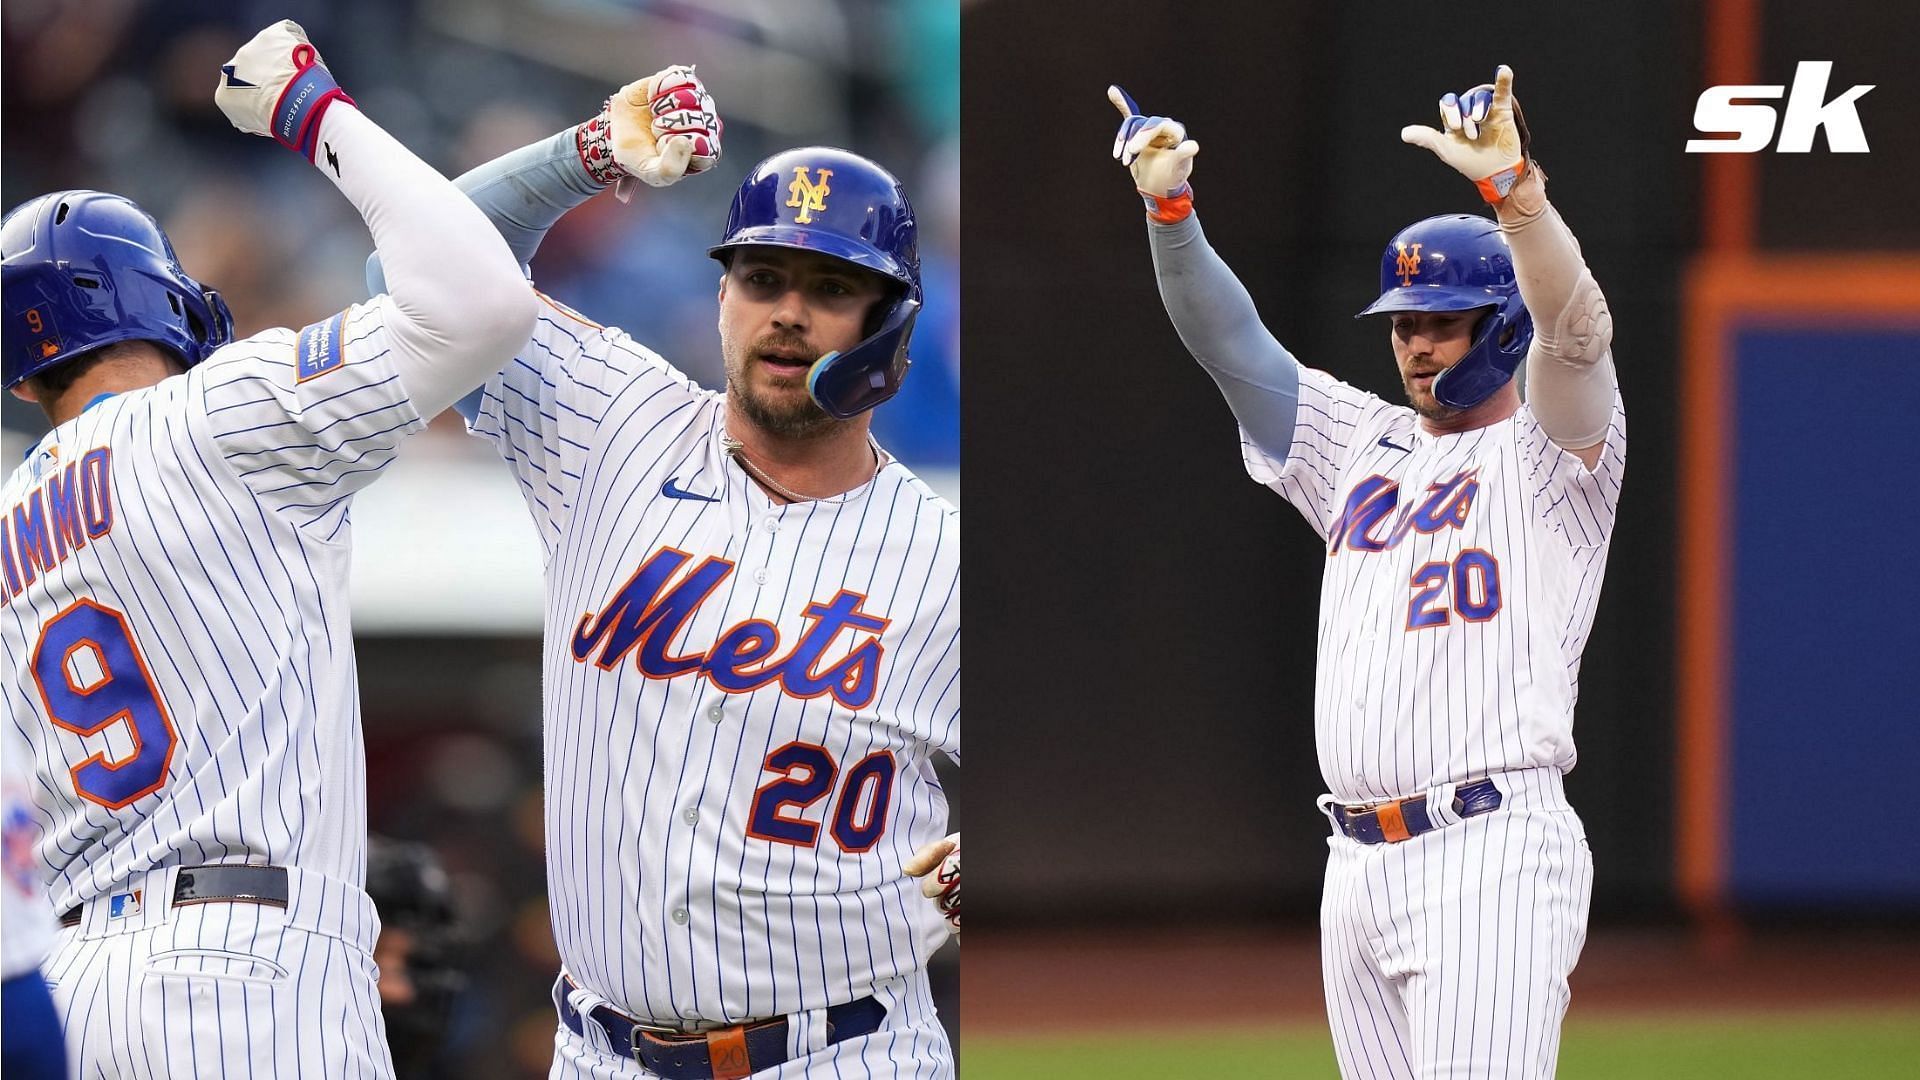 There is a chance that the New York Mets could trade Pete Alonso before the end of next season